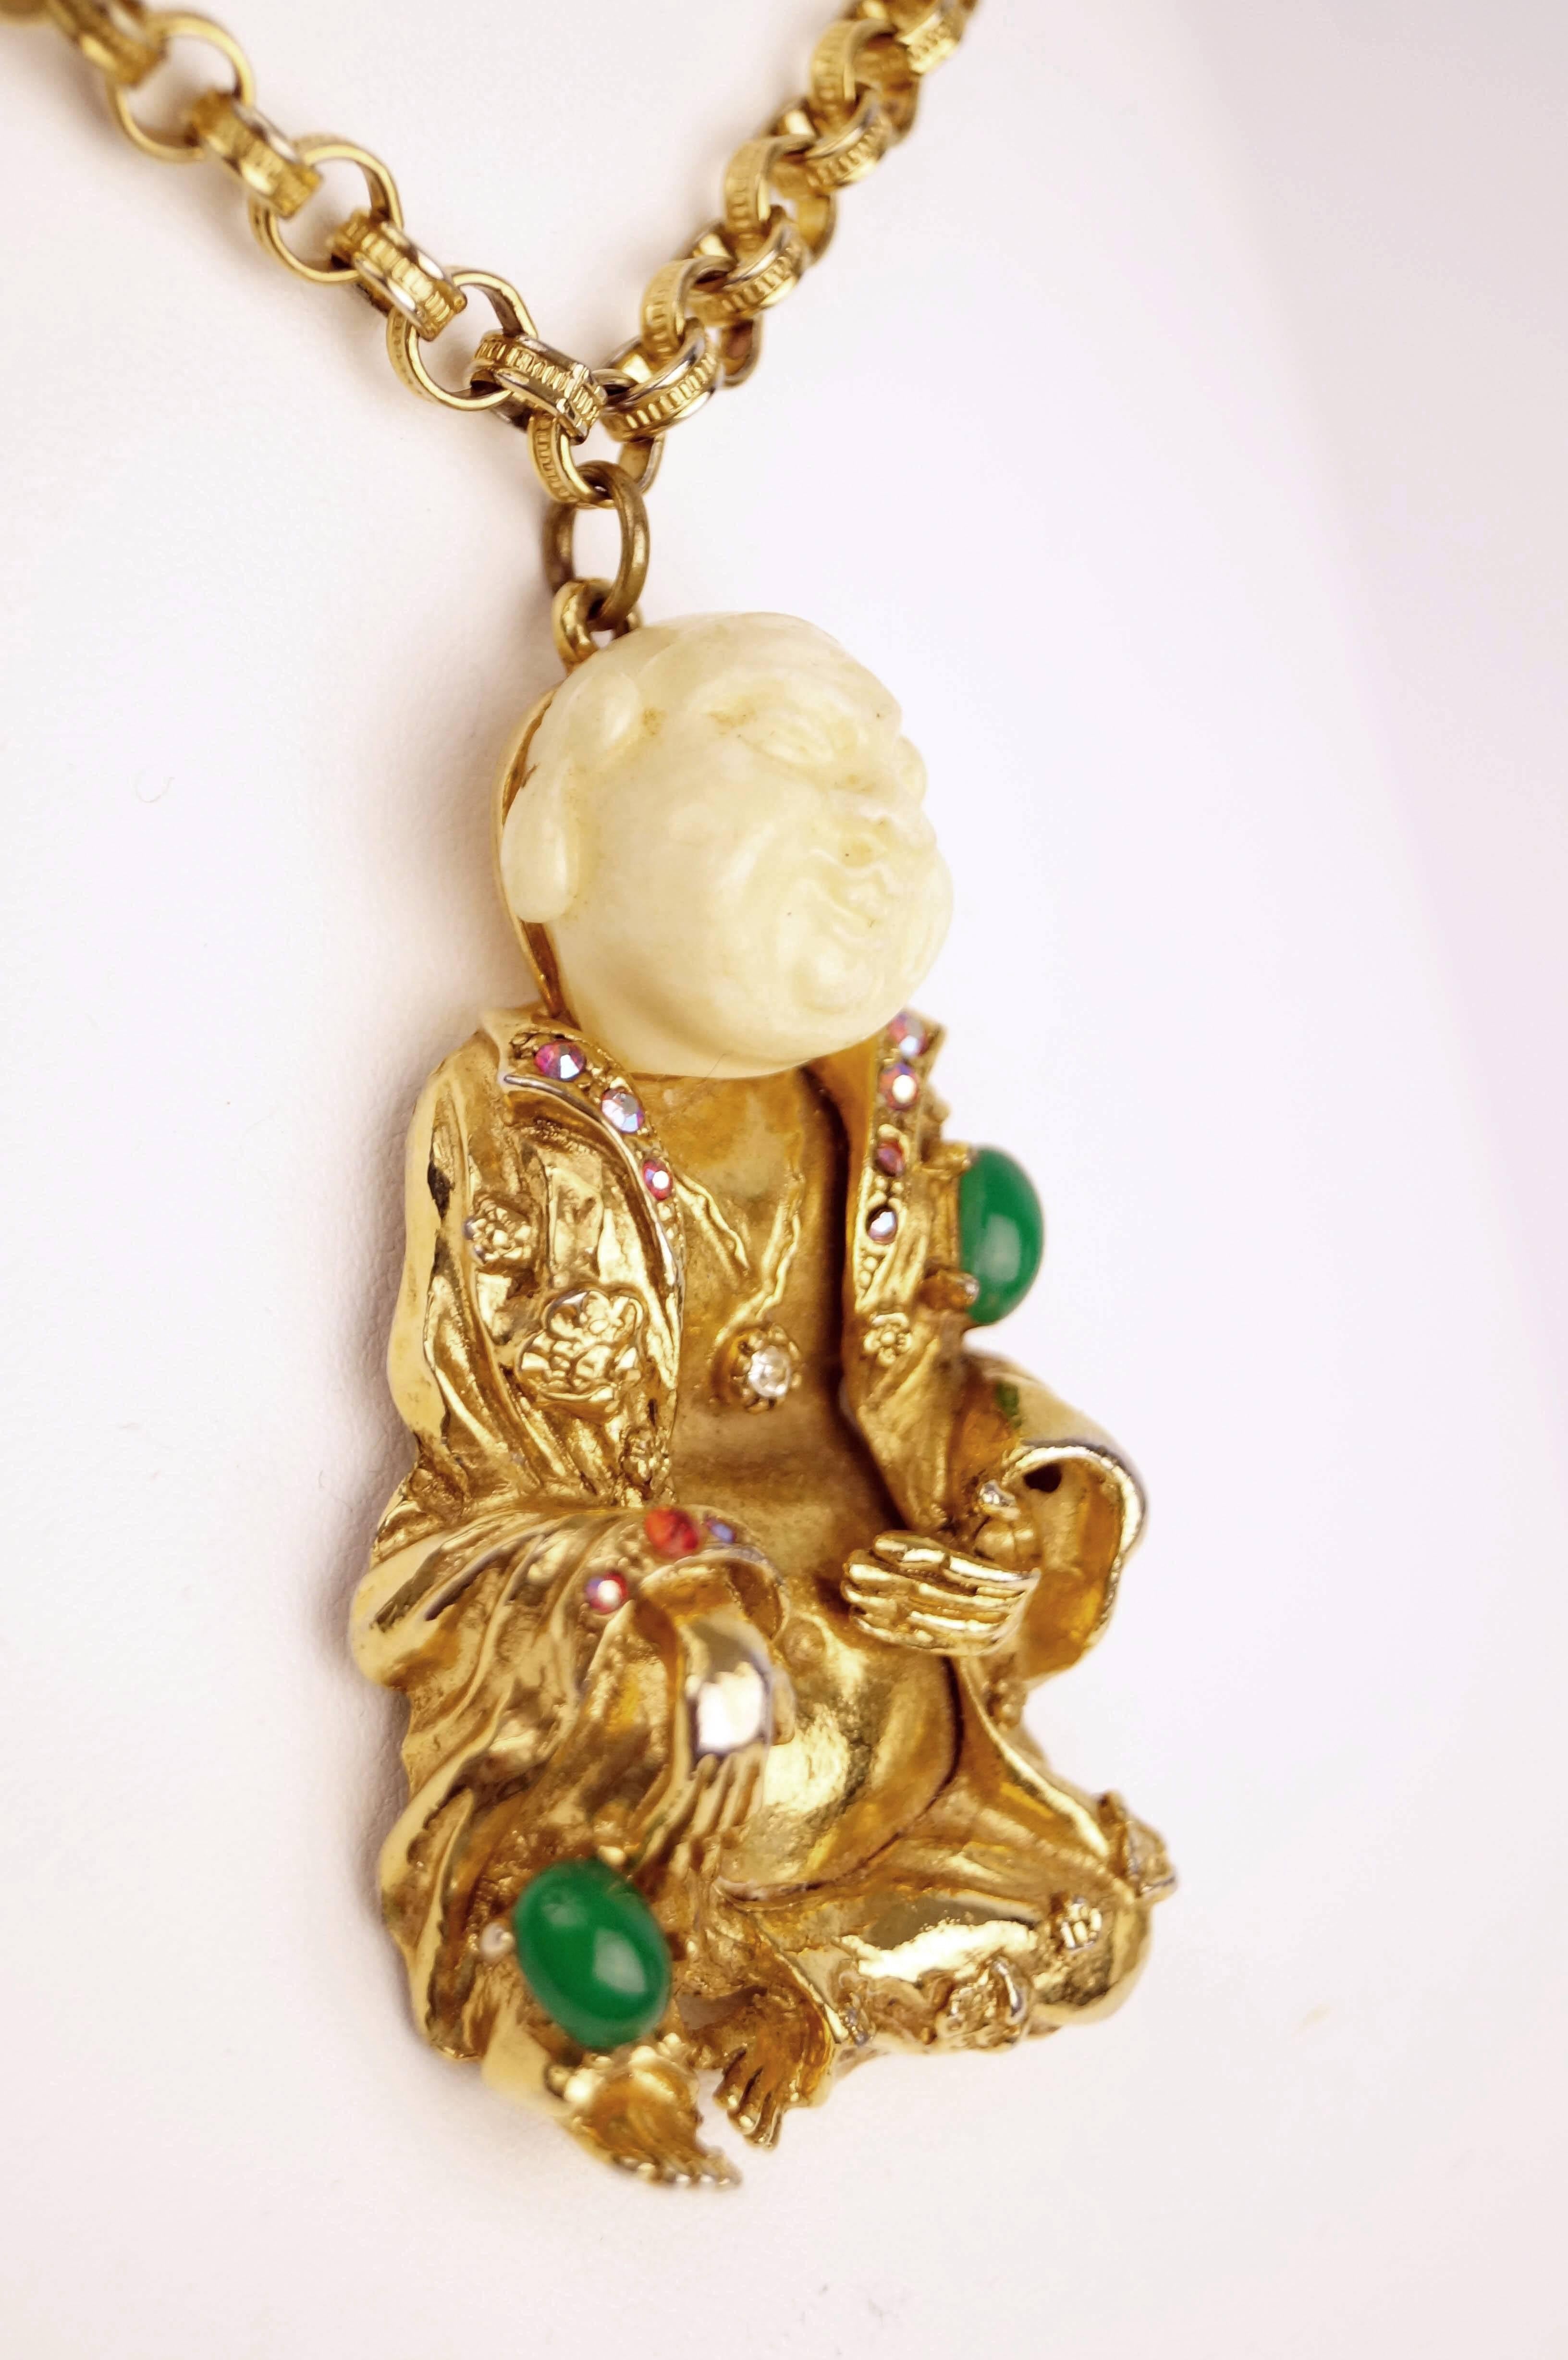 
This fun vintage laughing Buddha pendant by ART depicts a lounging figure with a faux ivory head and gold-tone body. The figure is wearing an elaborate open robe and medallion. The robe is adorned with faux jade cabochons and aurora borealis